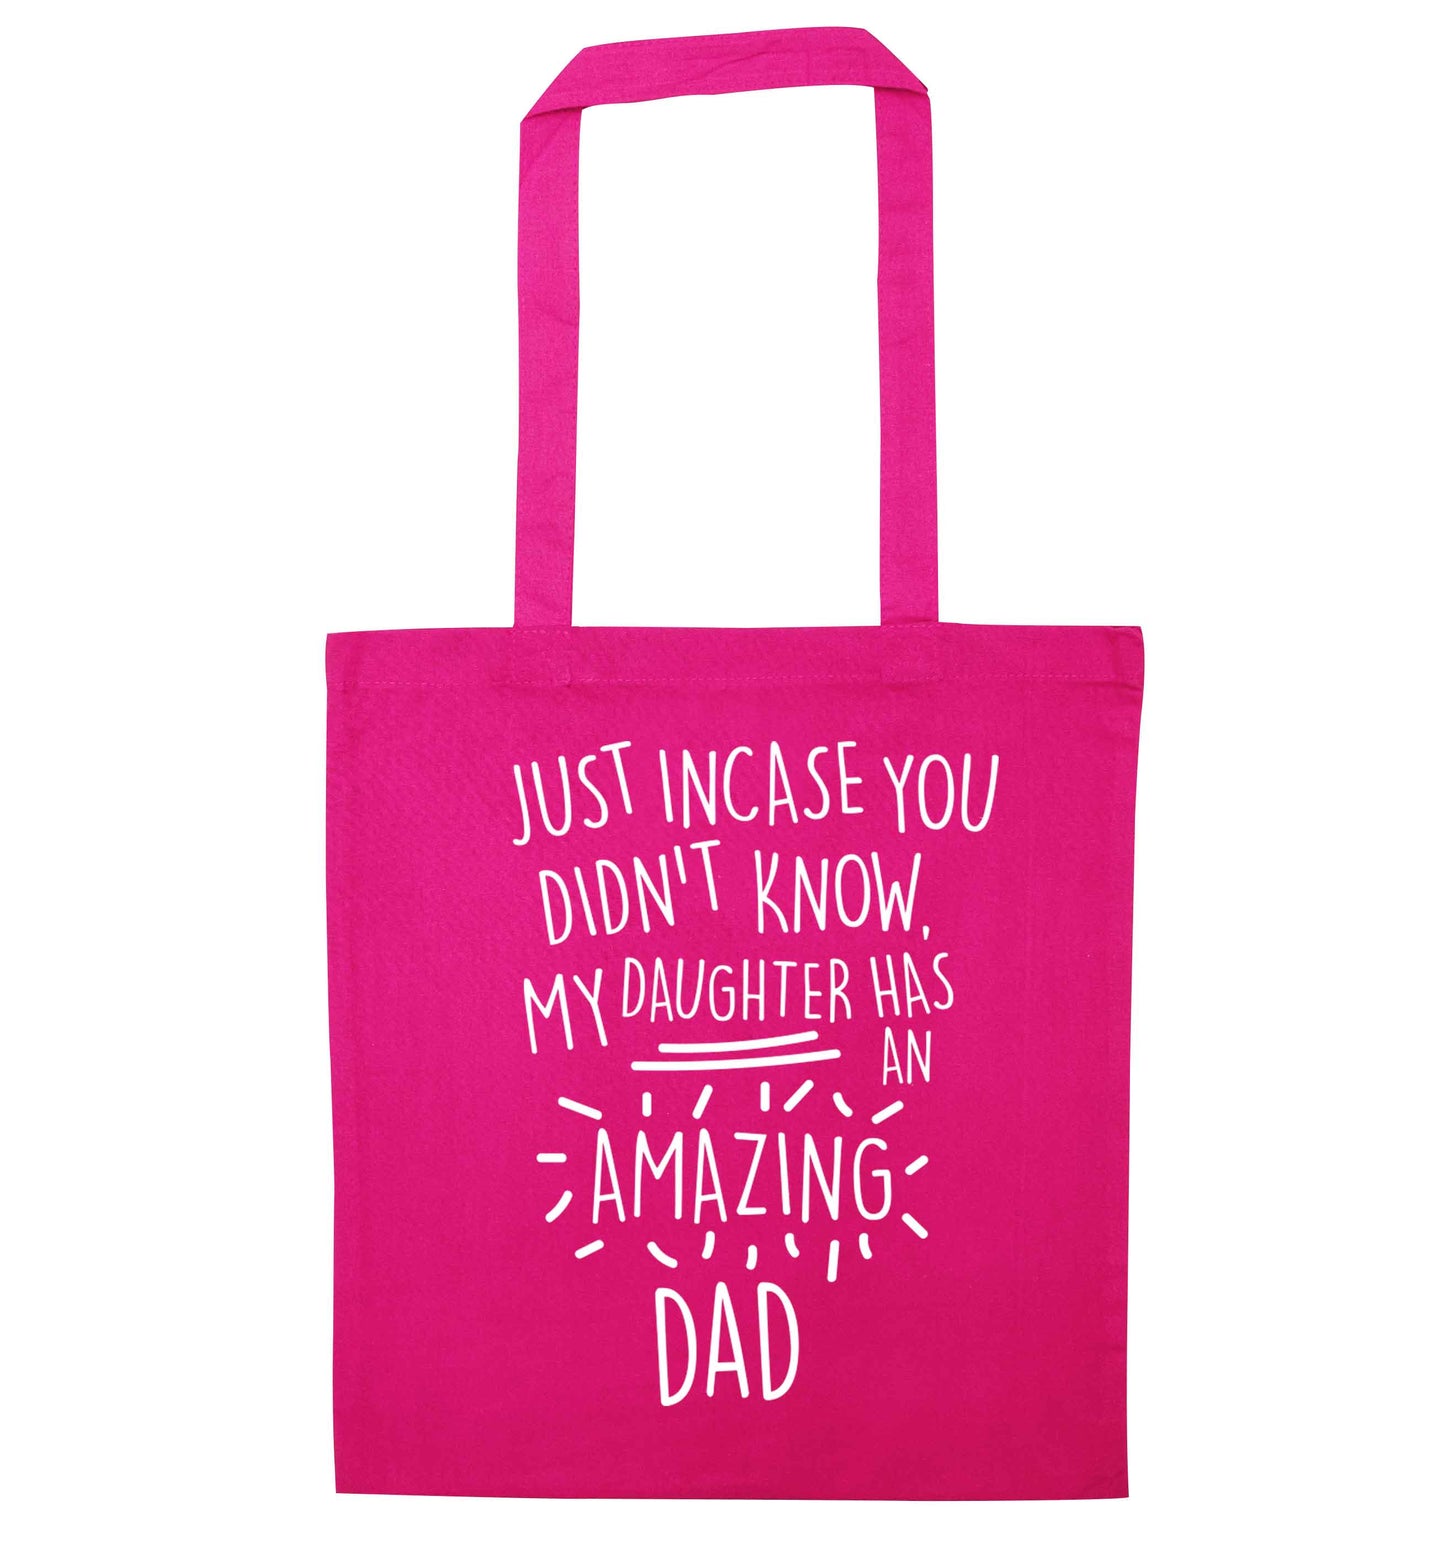 Just incase you didn't know my daughter has an amazing dad pink tote bag